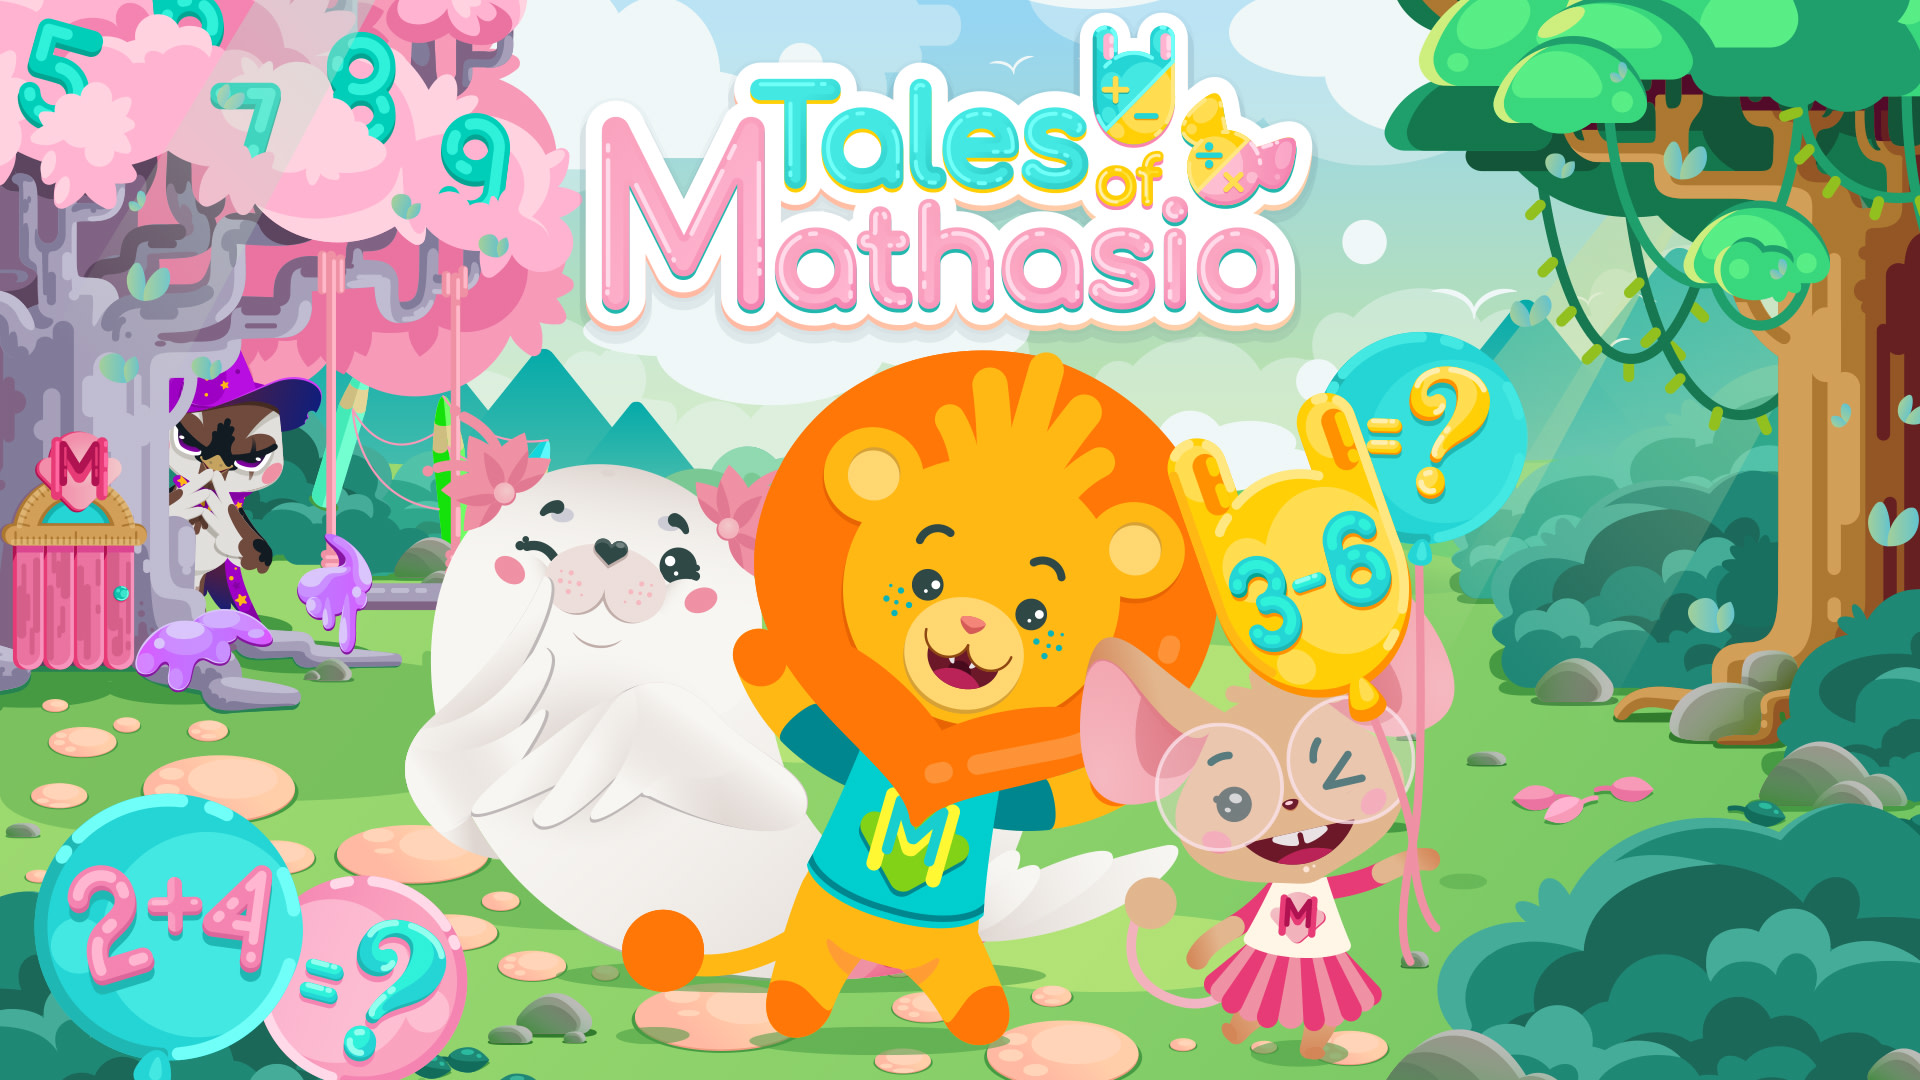 Tales of Mathasia 1